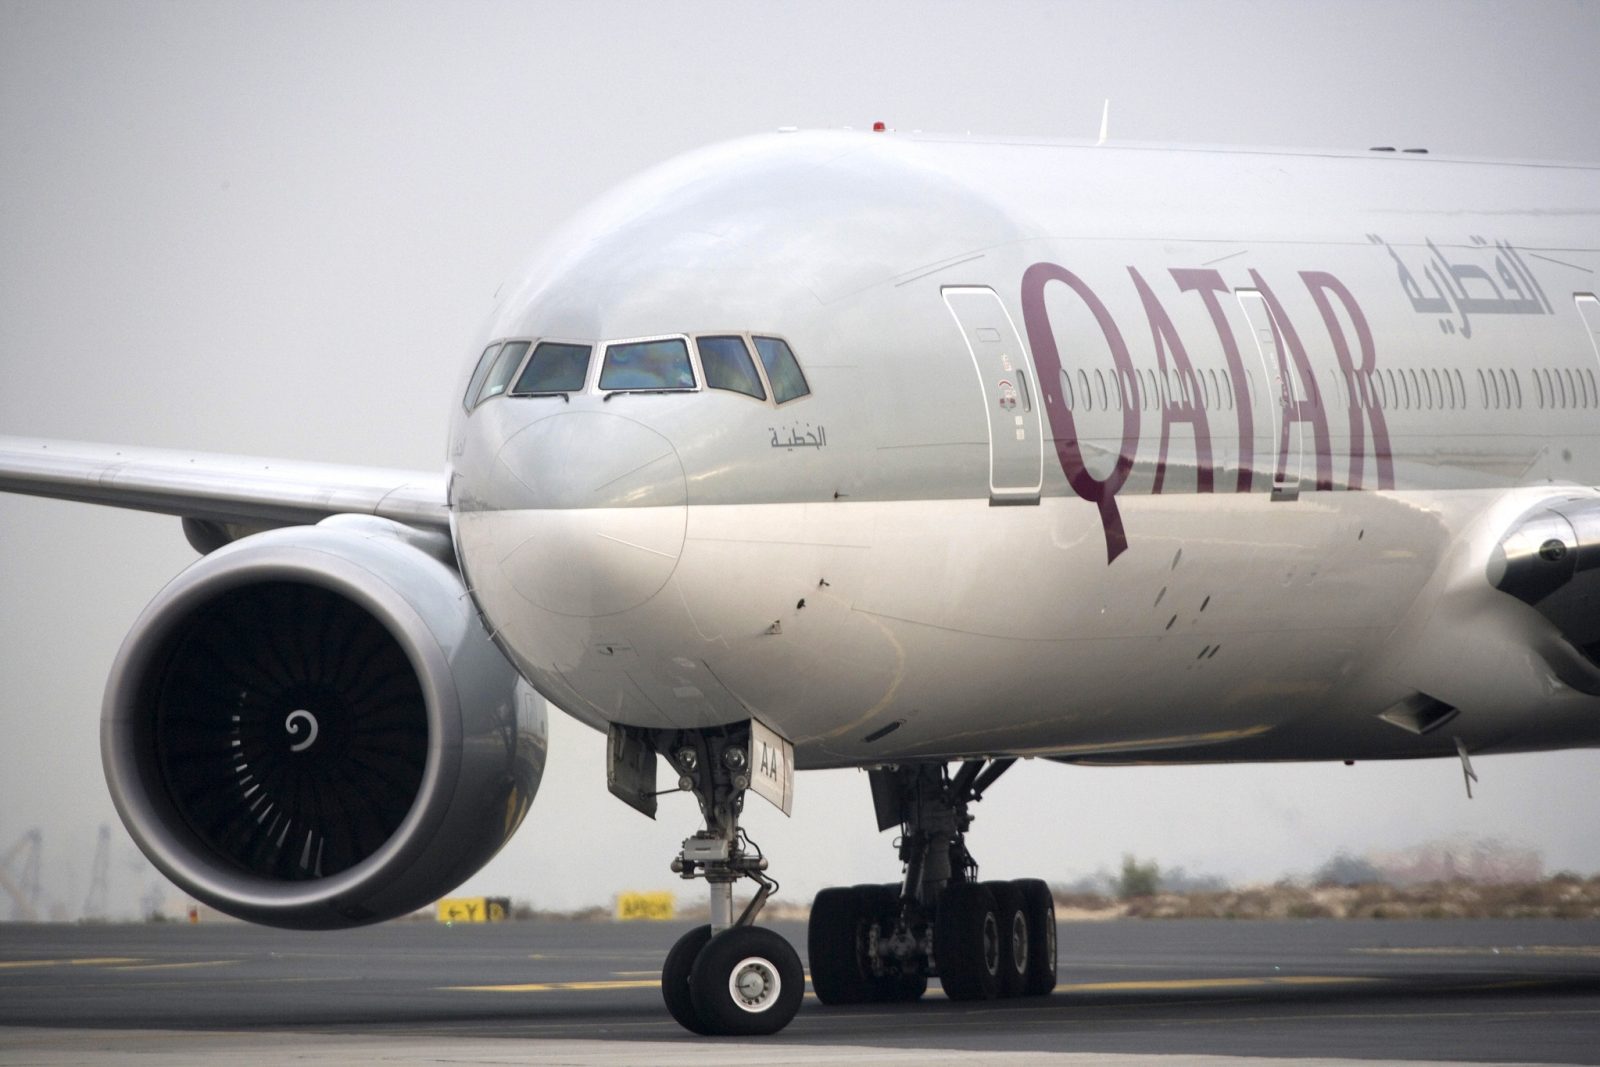 Qatar Airways CEO Akbar Al Baker Goes On Offensive, Teases New Airline Investment